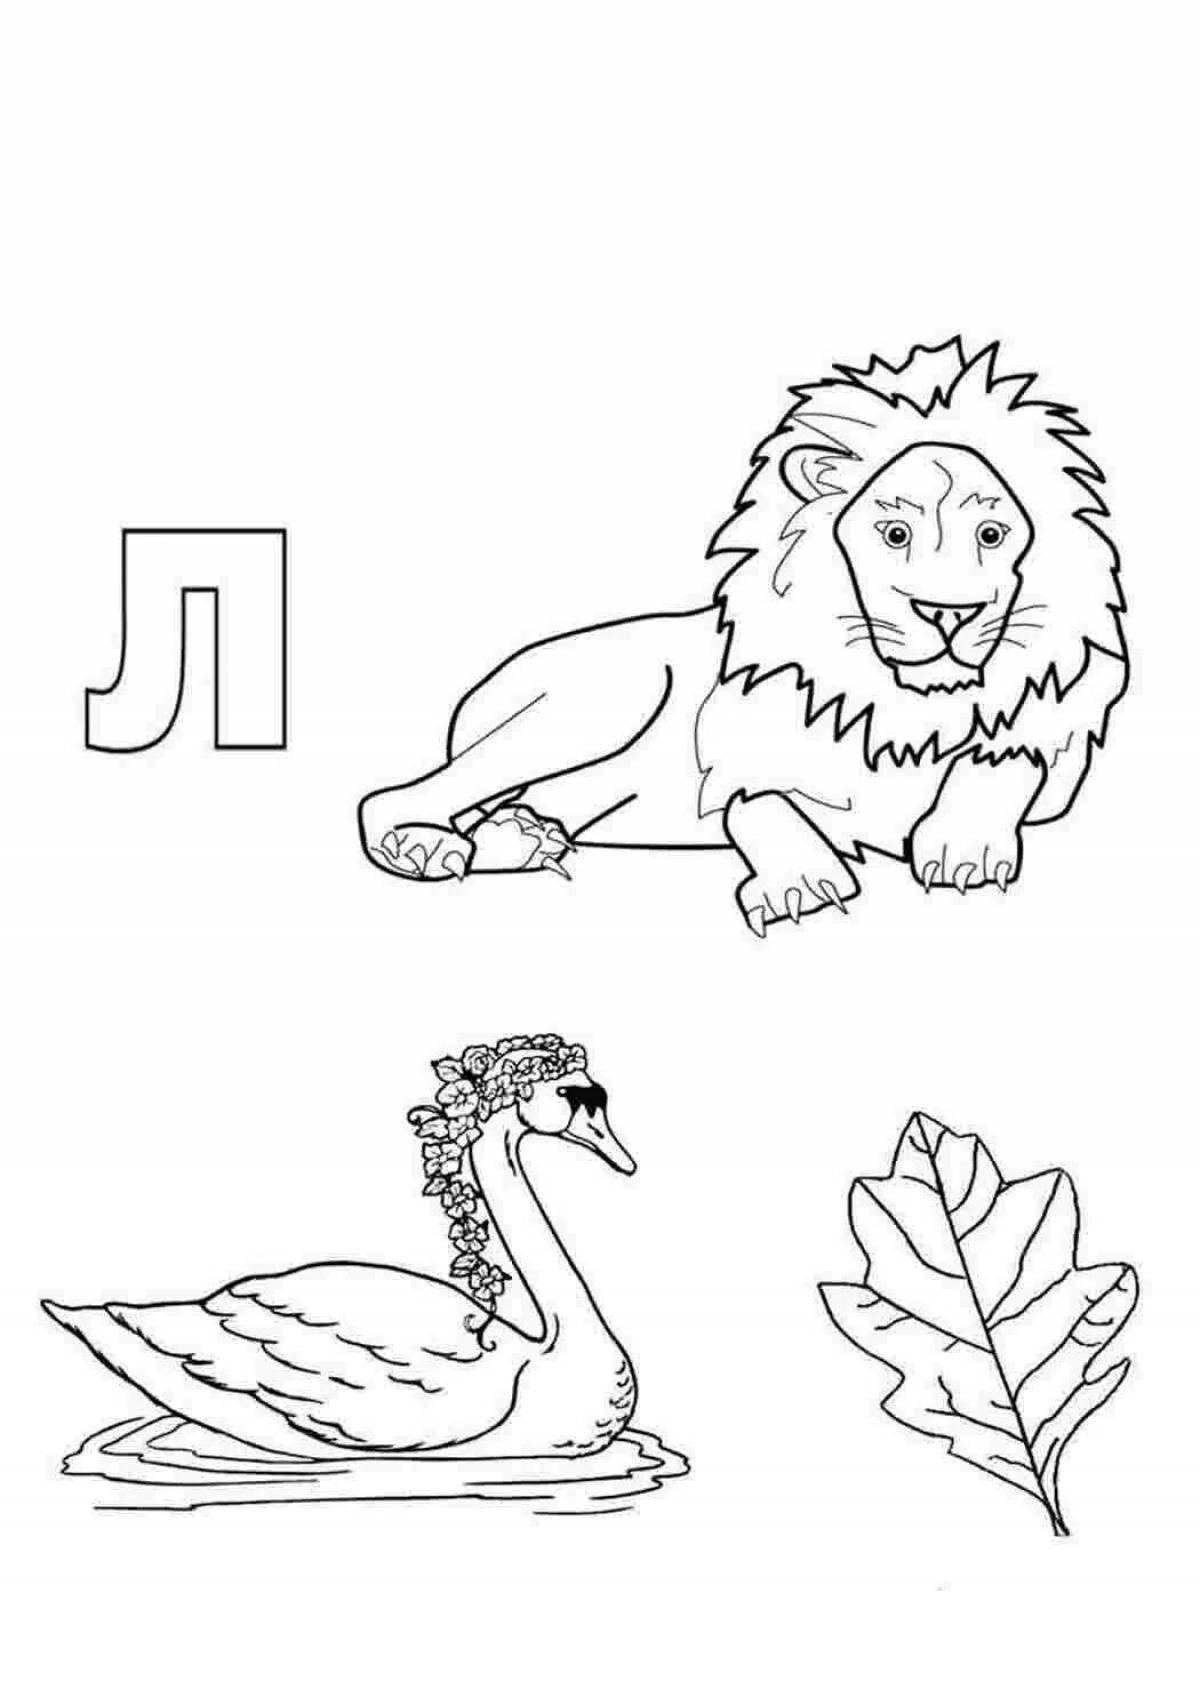 Colourful letter l coloring book for kids